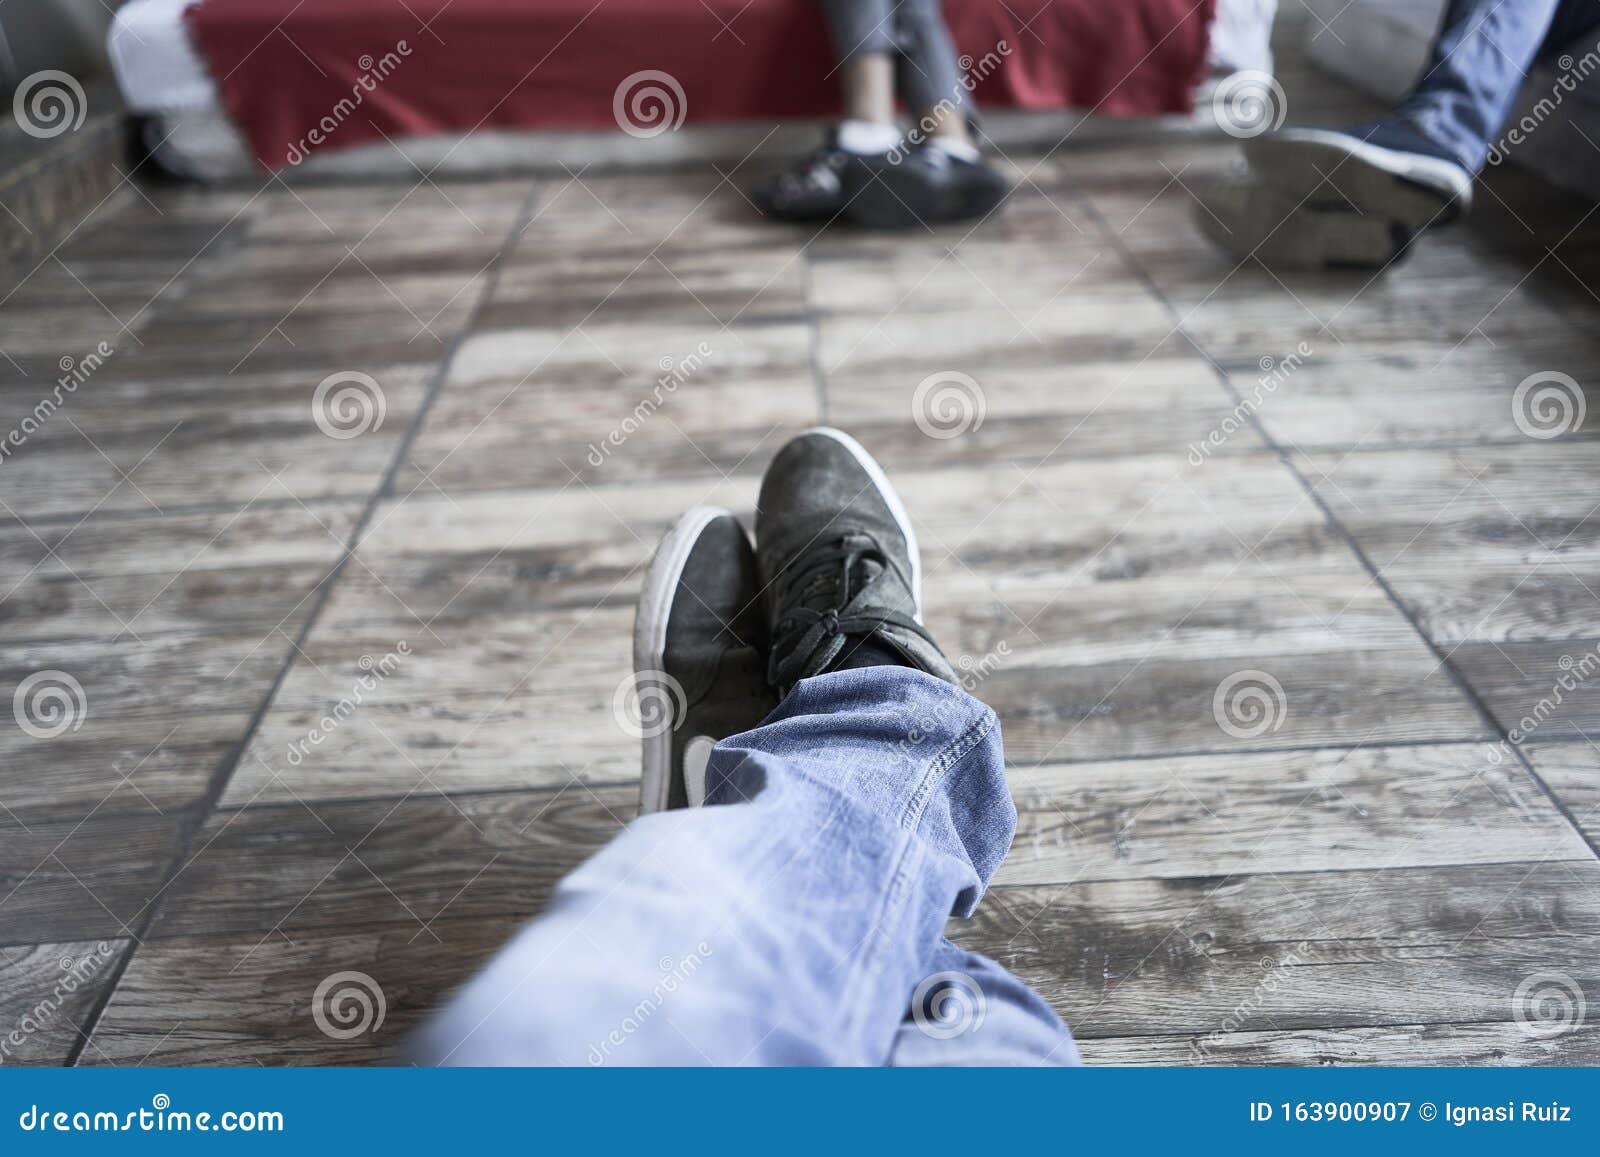 Handsome Man Sleeping in His Sofa. Legs View Stock Image - Image of ...